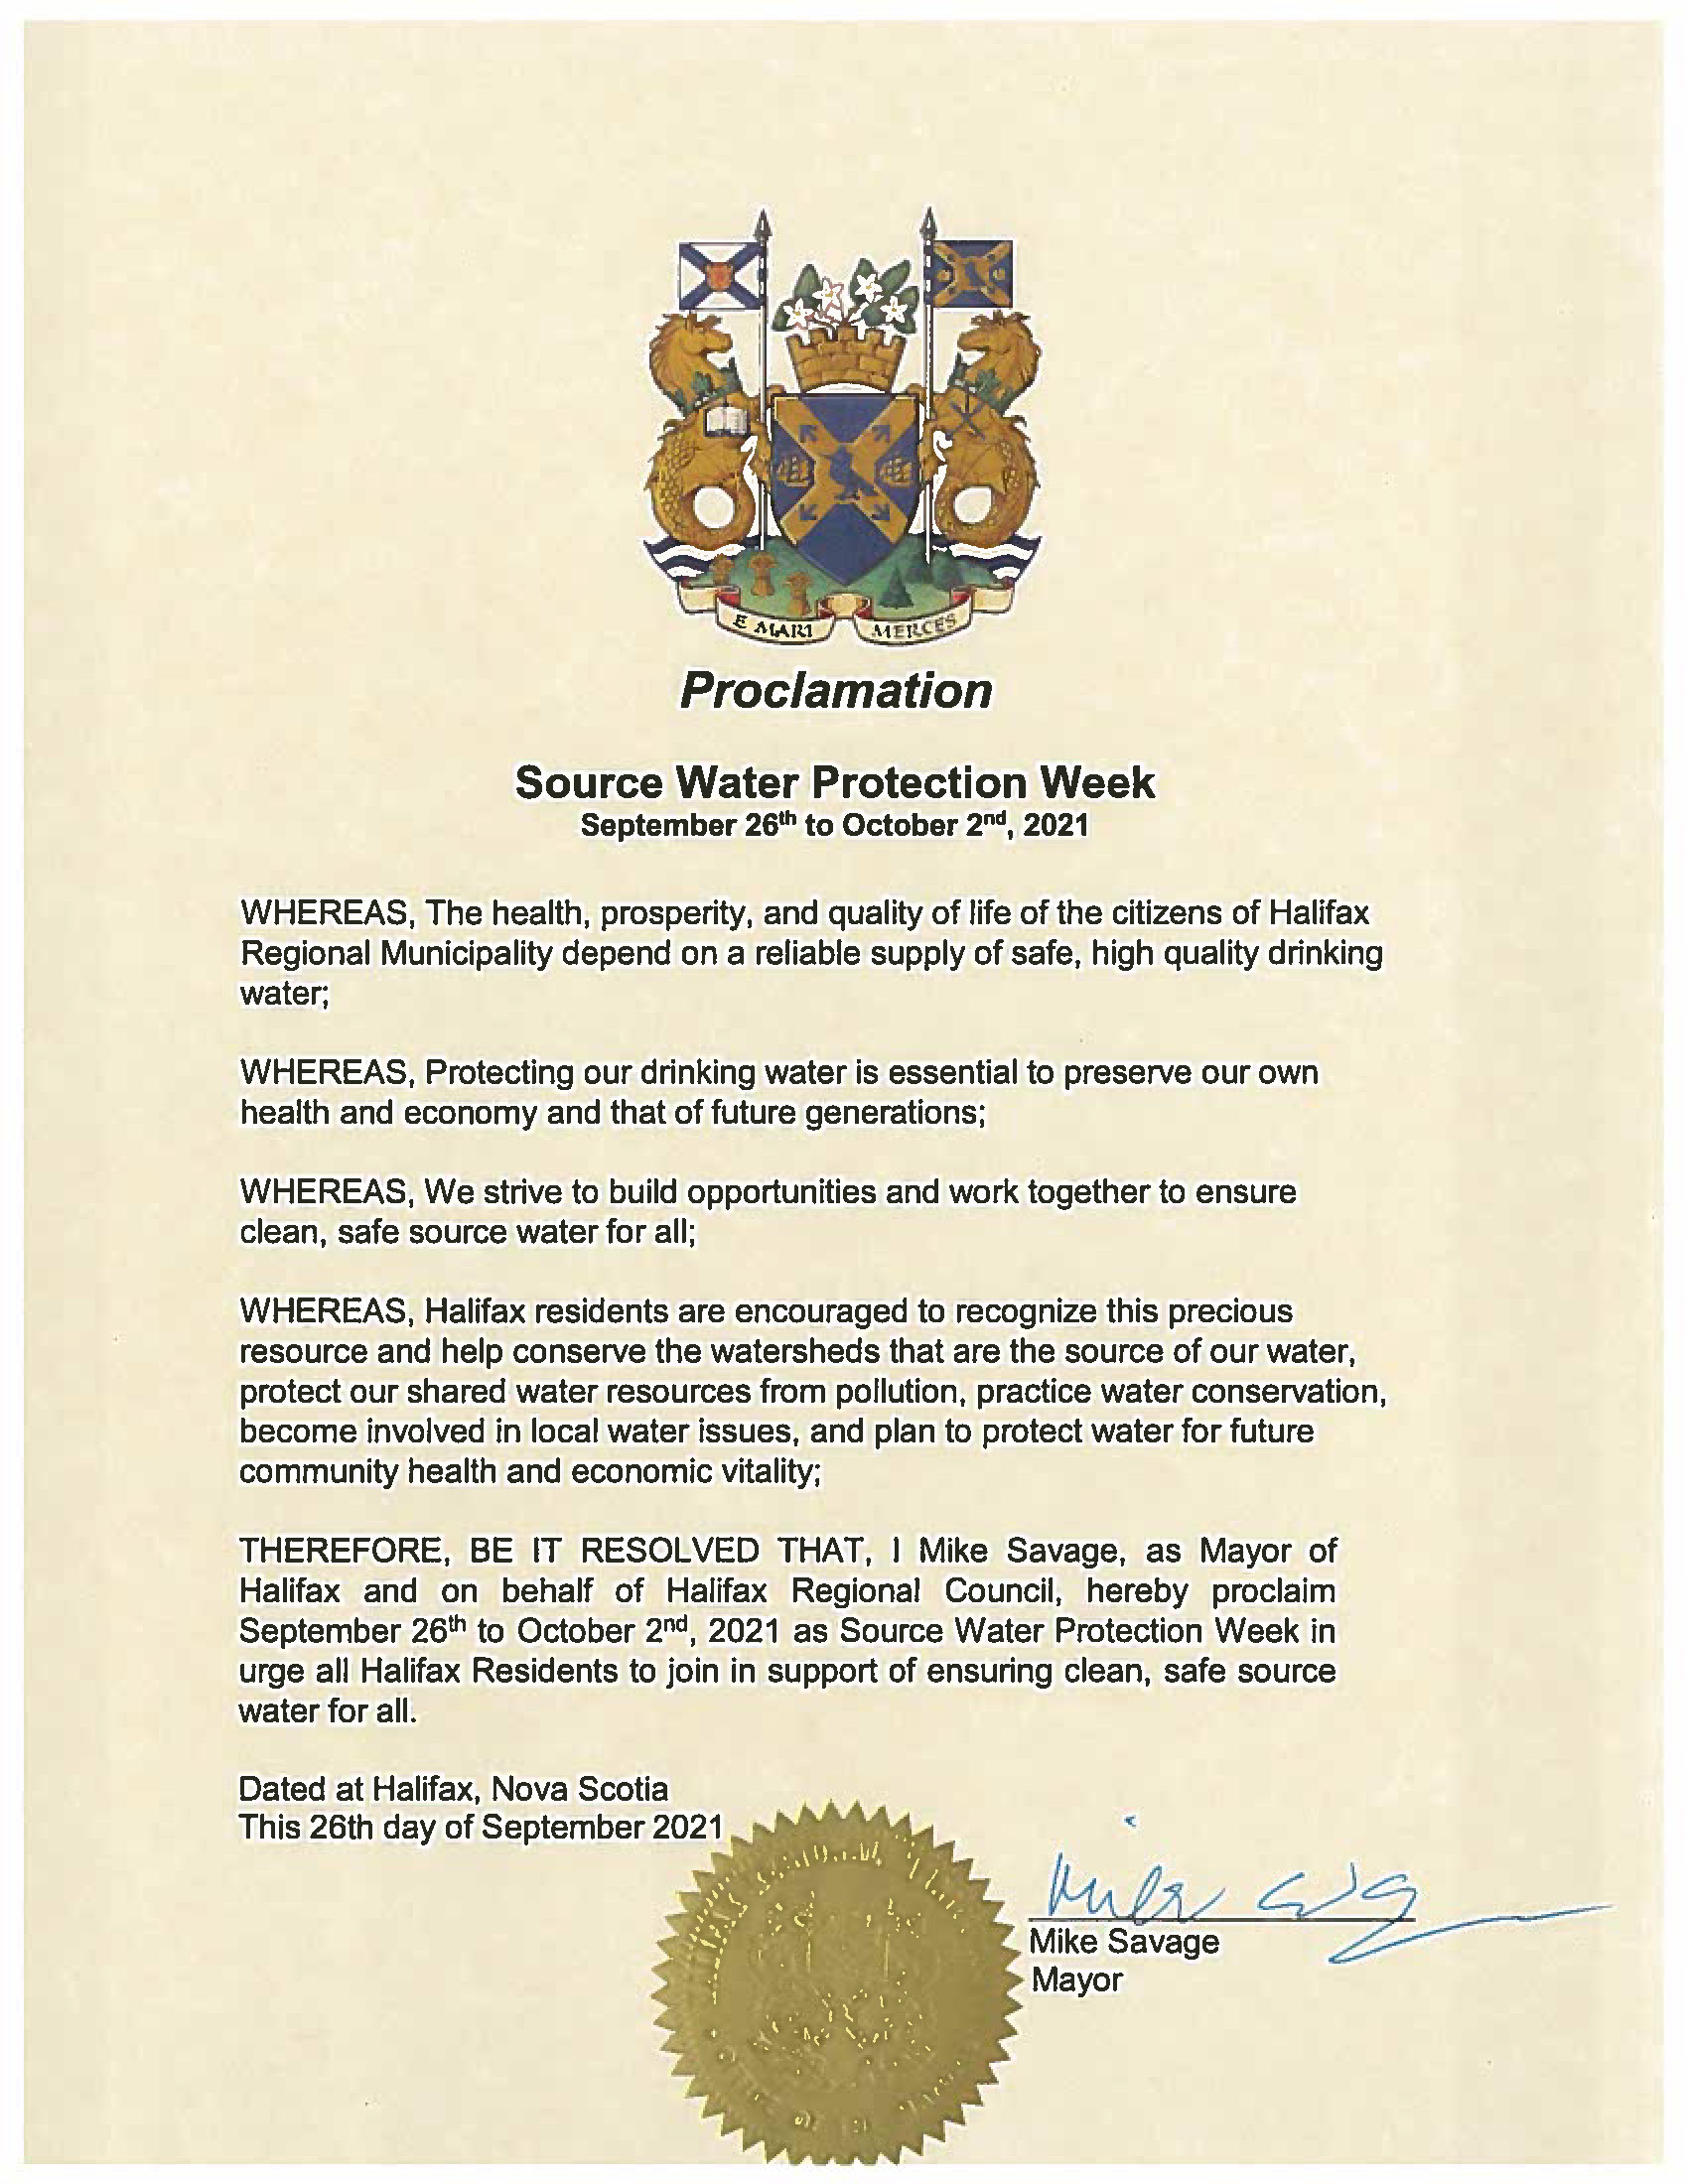 Source Water Protection Week 2021 Proclamation